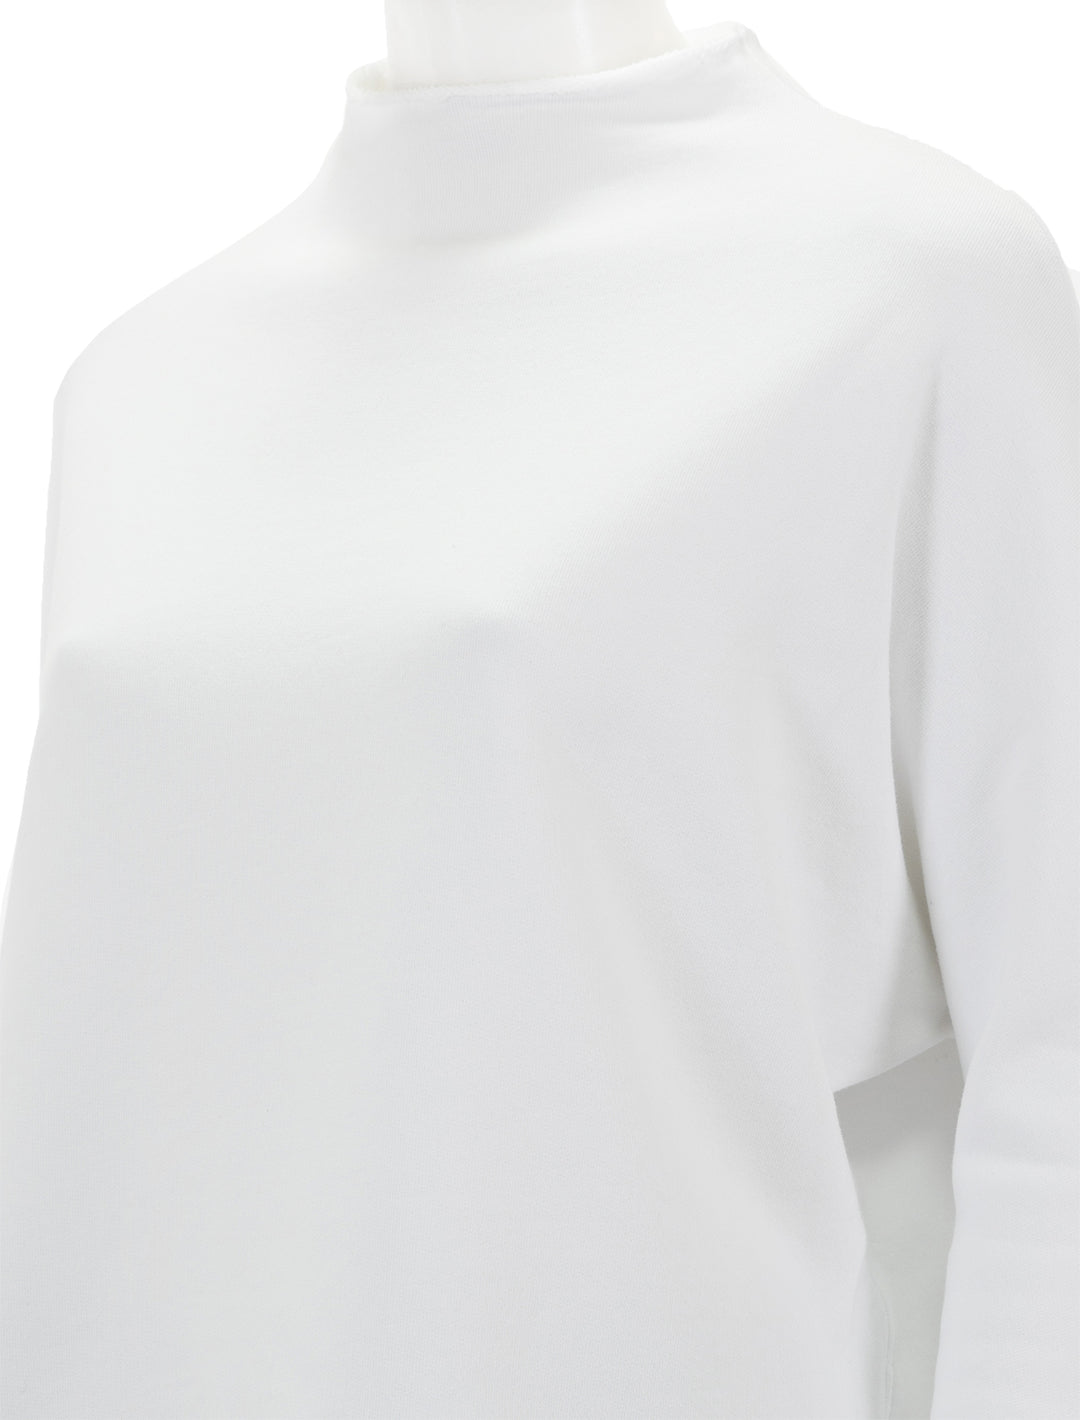 Close-up view of Frank & Eileen's funnelneck capelet in white.